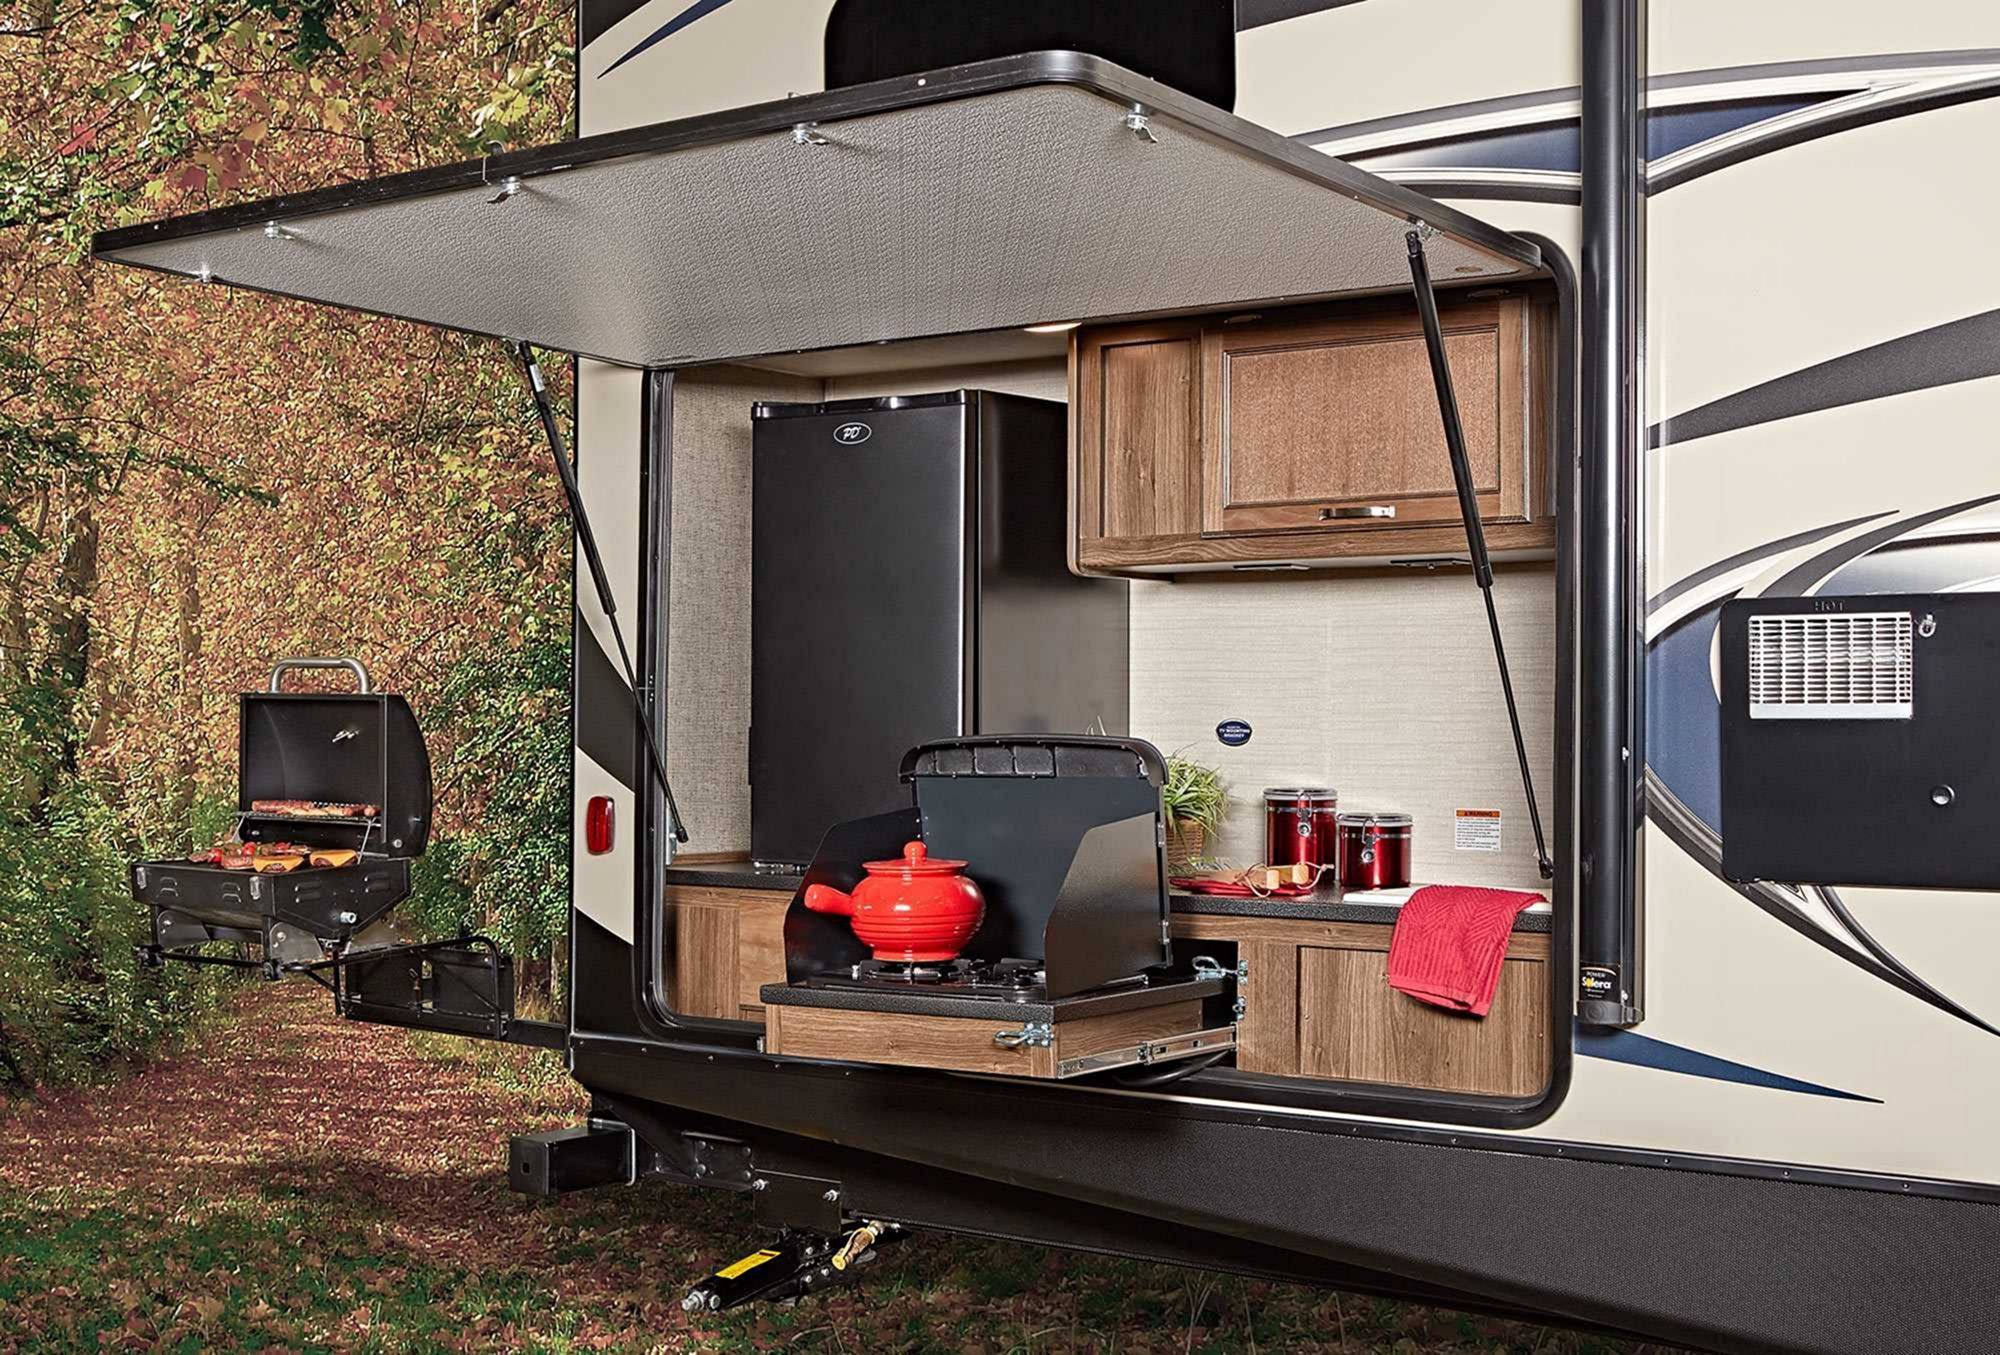 Camper With Outdoor Kitchen
 Travel Trailer With Outdoor Kitchen And Bunkhouse